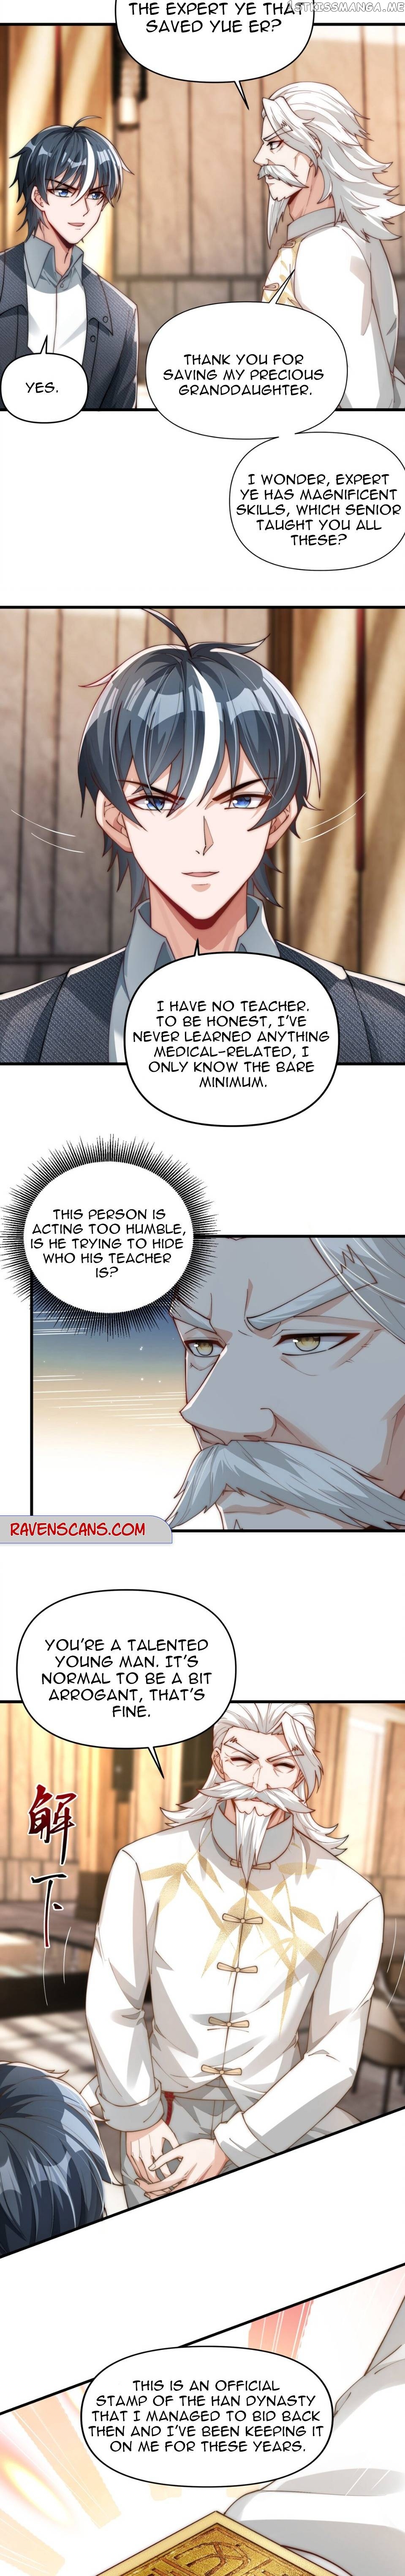 Rebirth of the First Urban Immortal Emperor Ch.16 Page 5 - Mangago